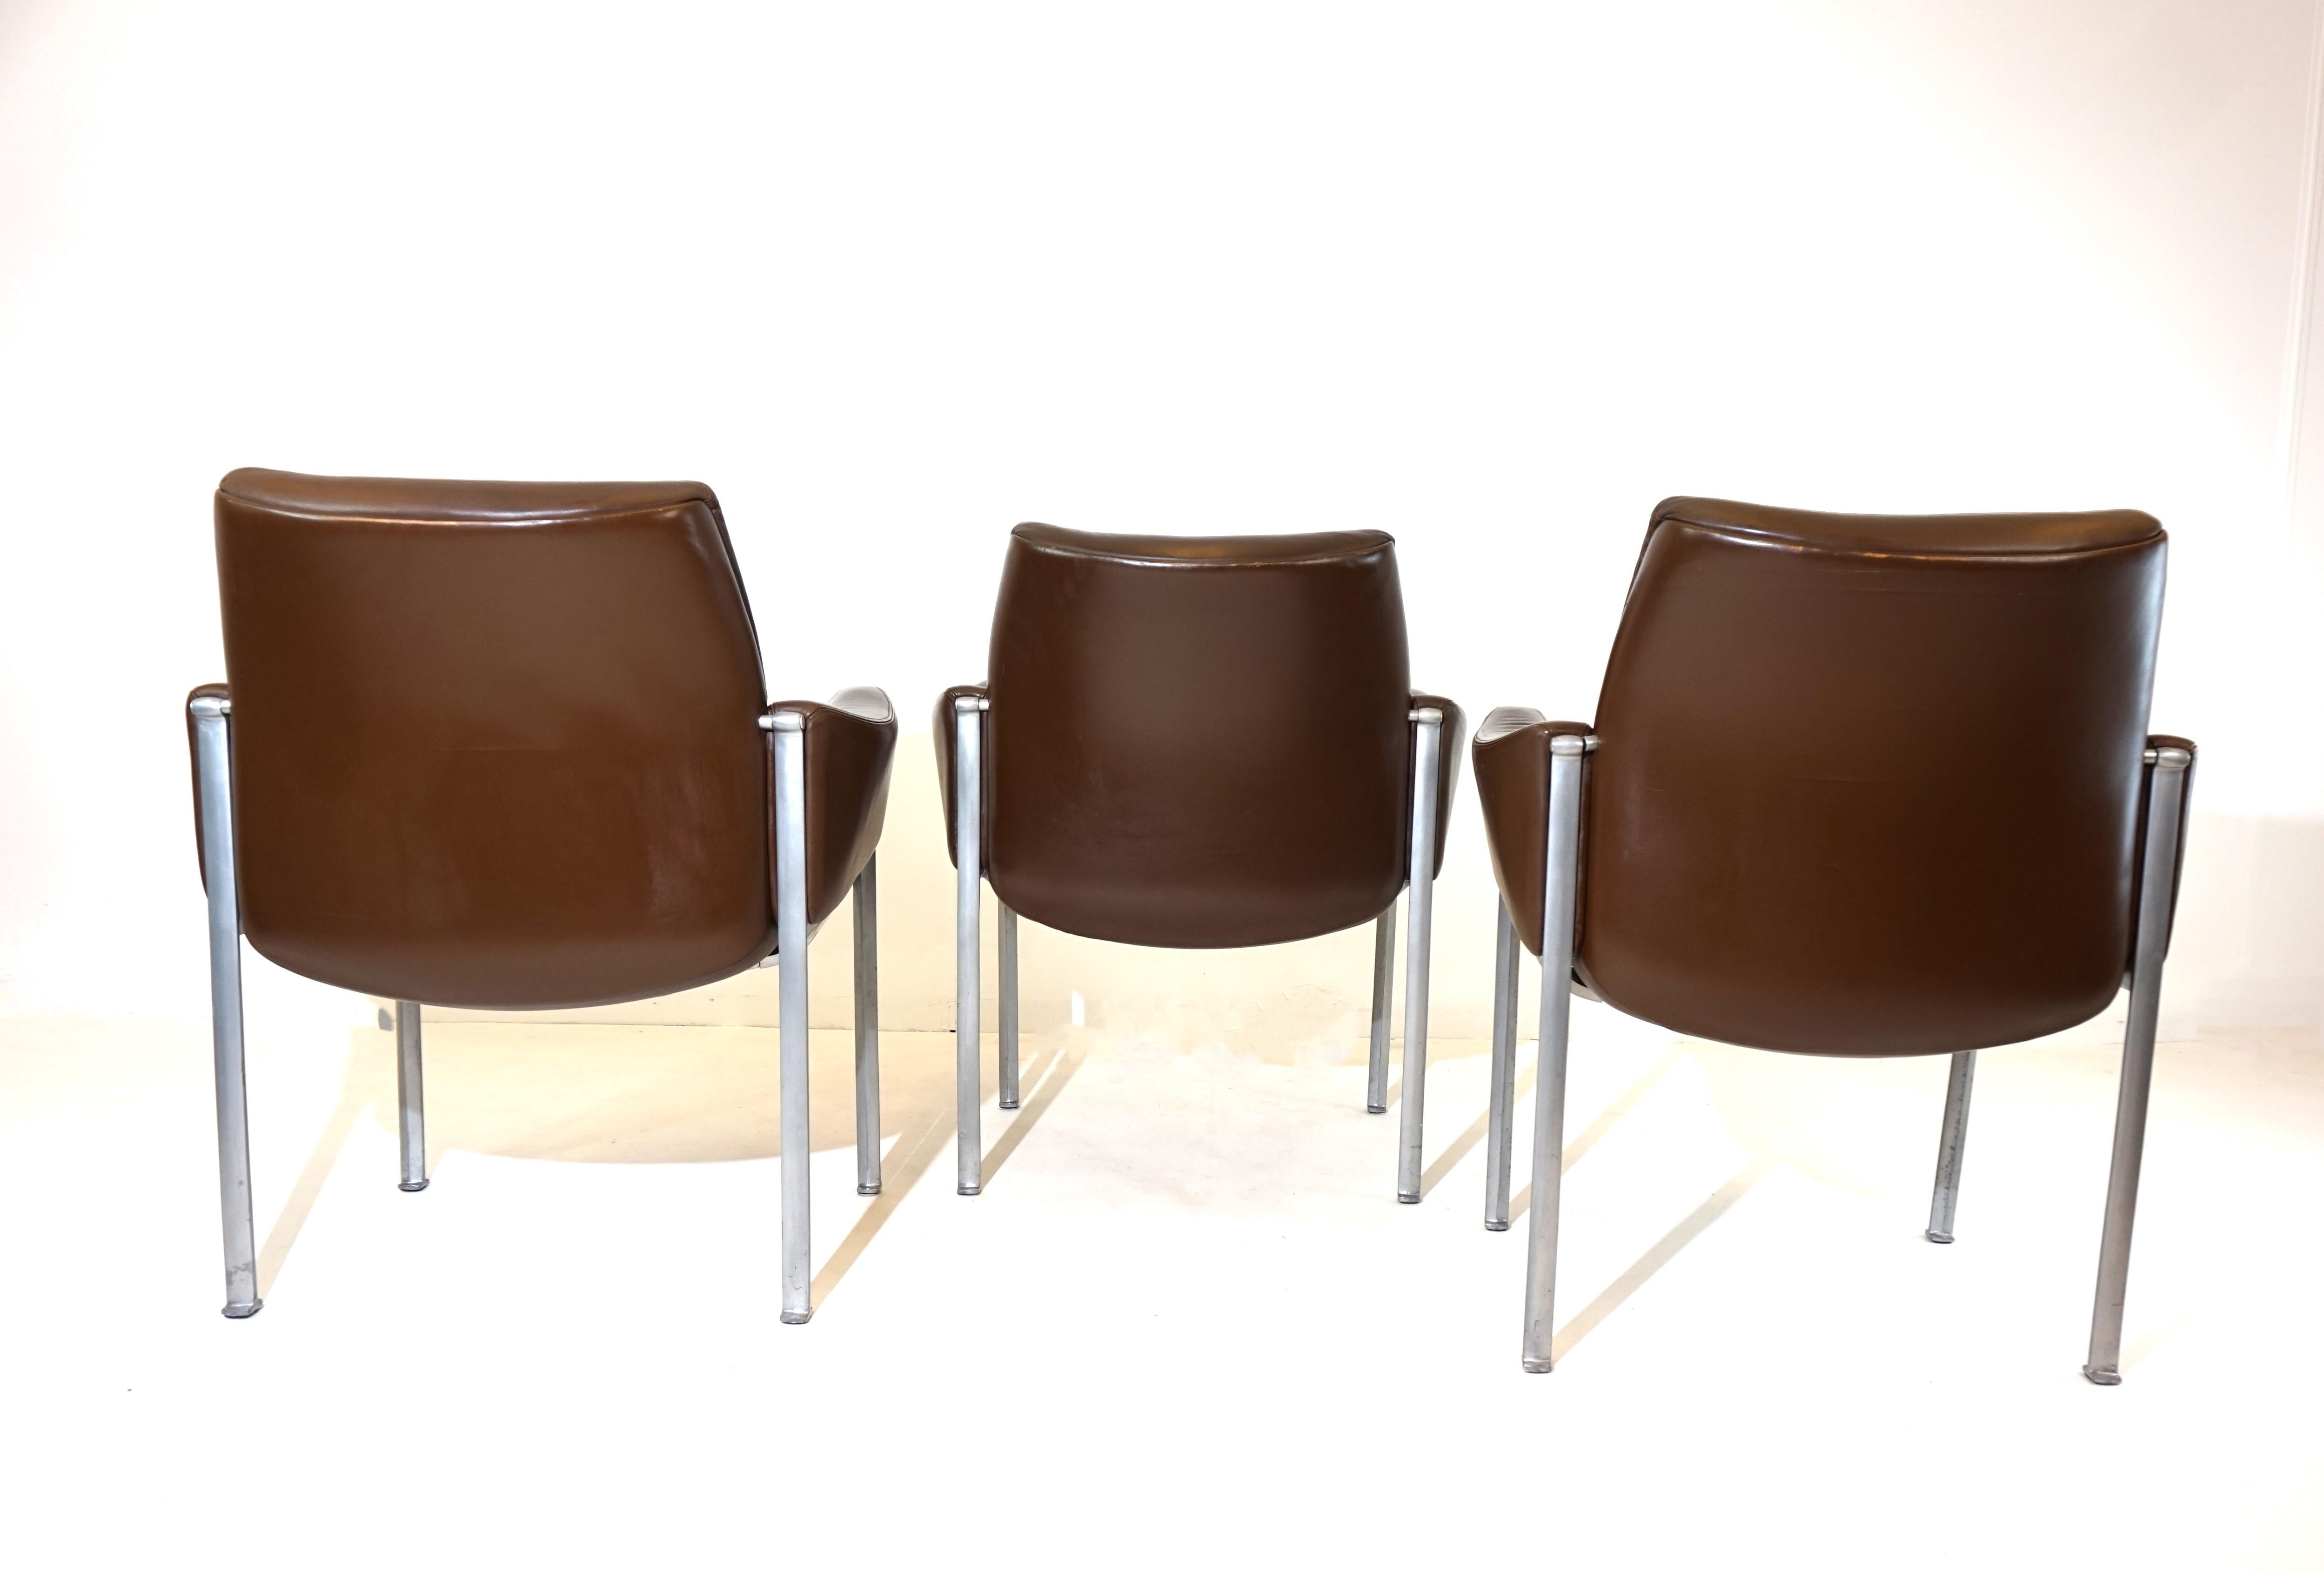 German Röder Söhne Set of 3 leather office/dining room chairs by Miller Borgsen